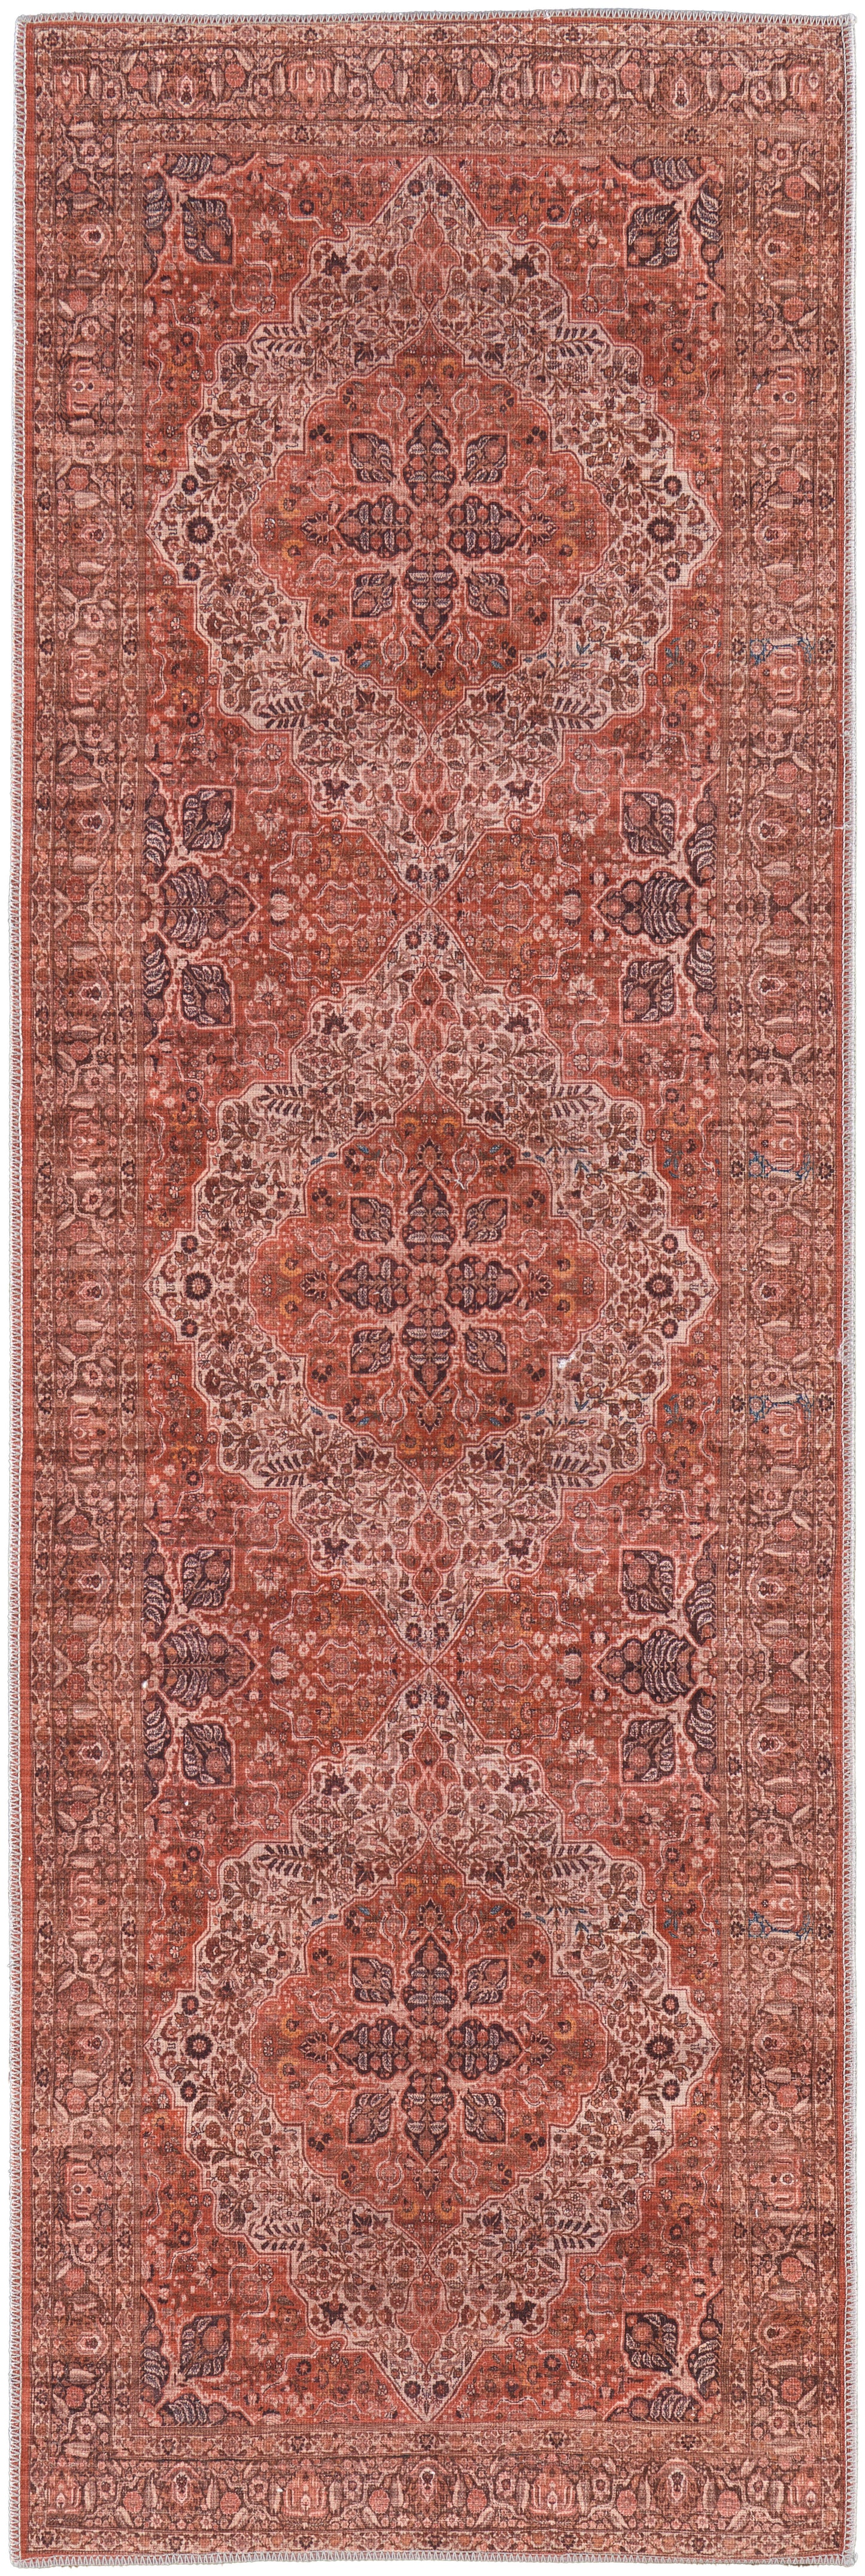 Rawlins 39HNF Power Loomed Synthetic Blend Indoor Area Rug by Feizy Rugs